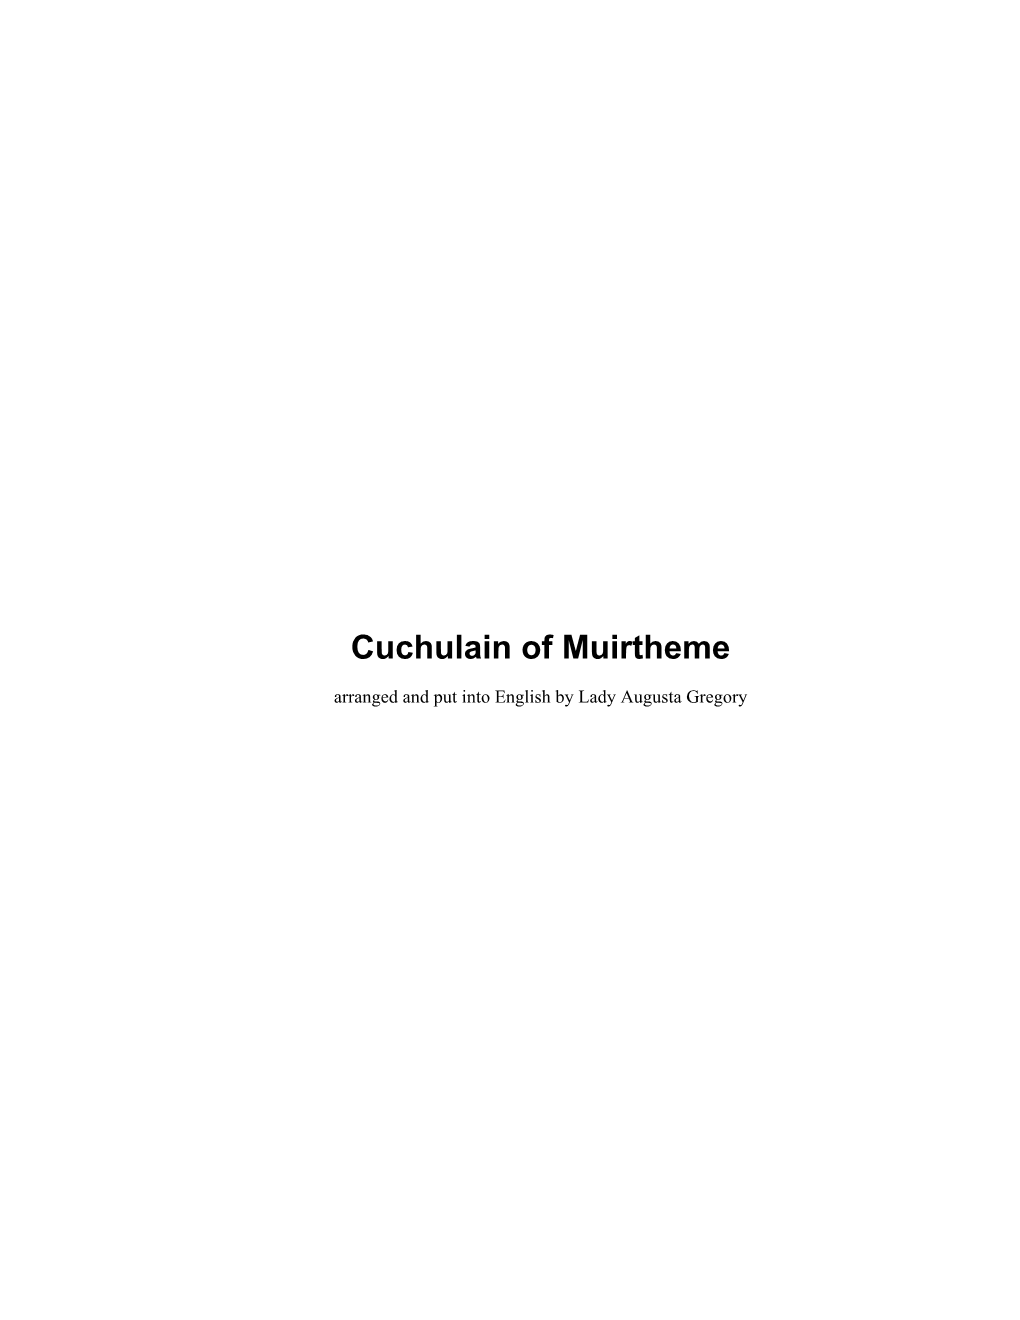 Cuchulain of Muirtheme Arranged and Put Into English by Lady Augusta Gregory Cuchulain of Muirtheme Table of Contents